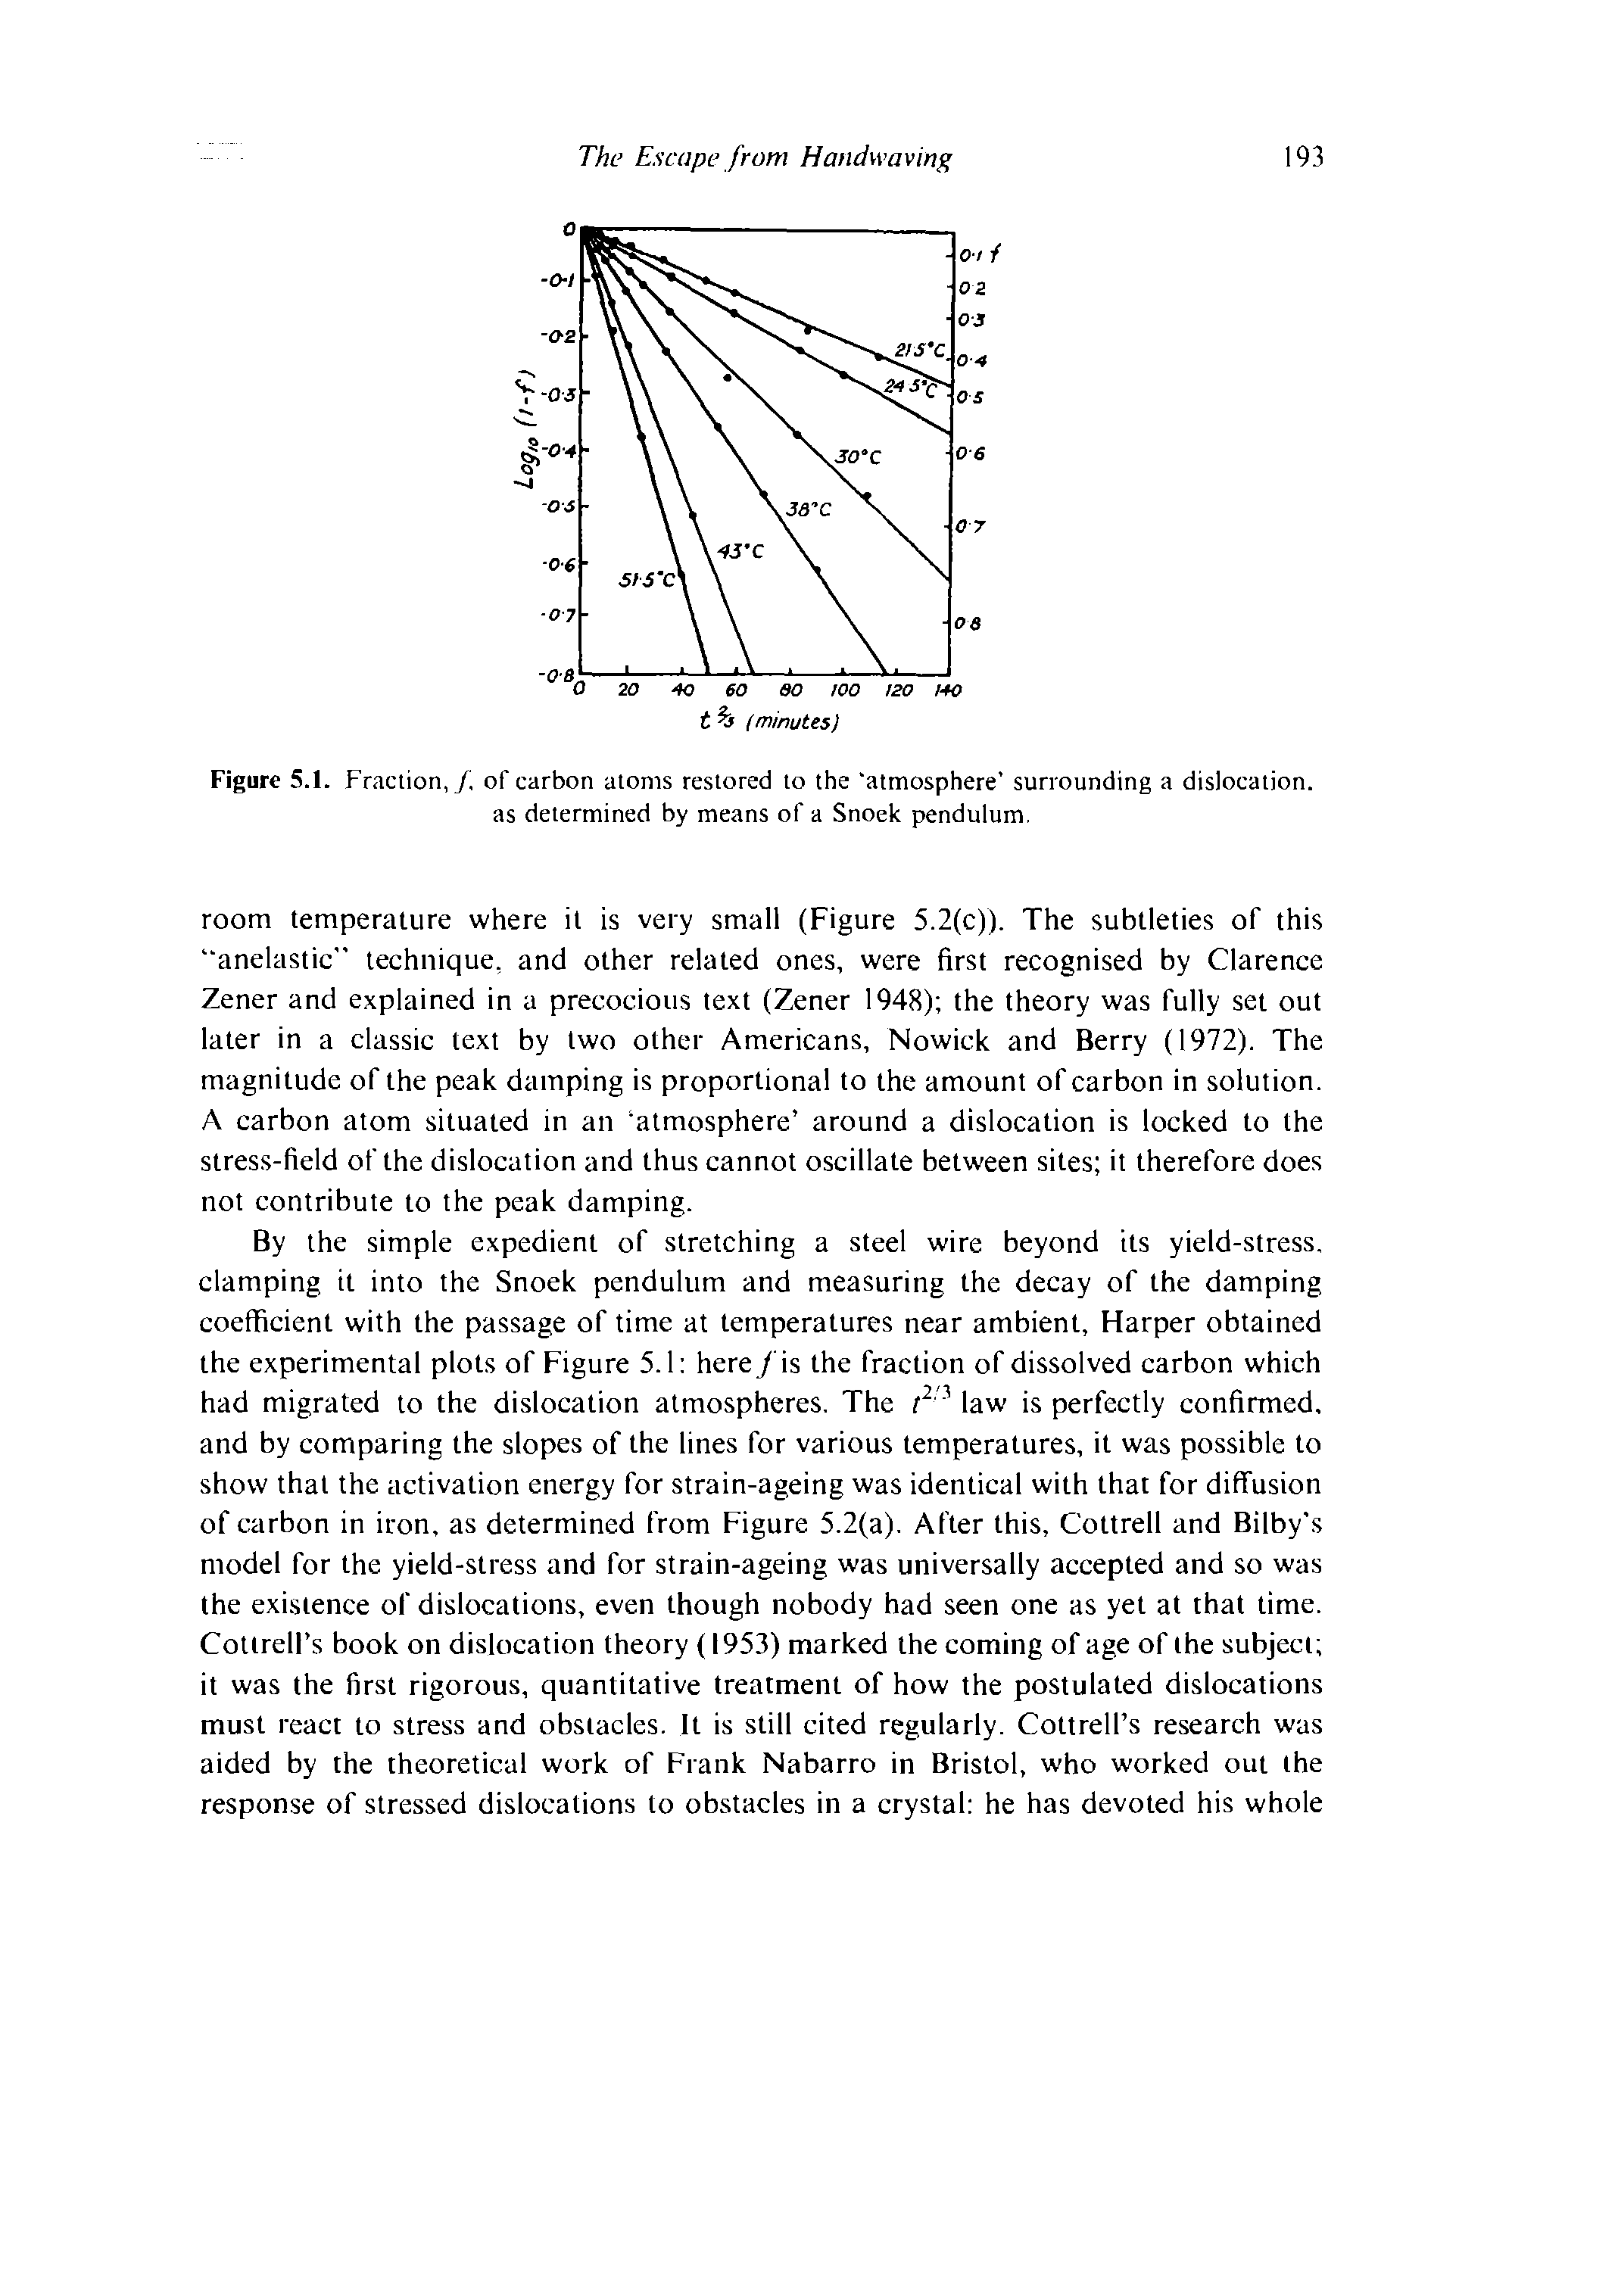 Figure 5.1. Fraction, / of carbon atoms restored to the "atmosphere surrounding a dislocation, as determined by means of a Snoek pendulum.